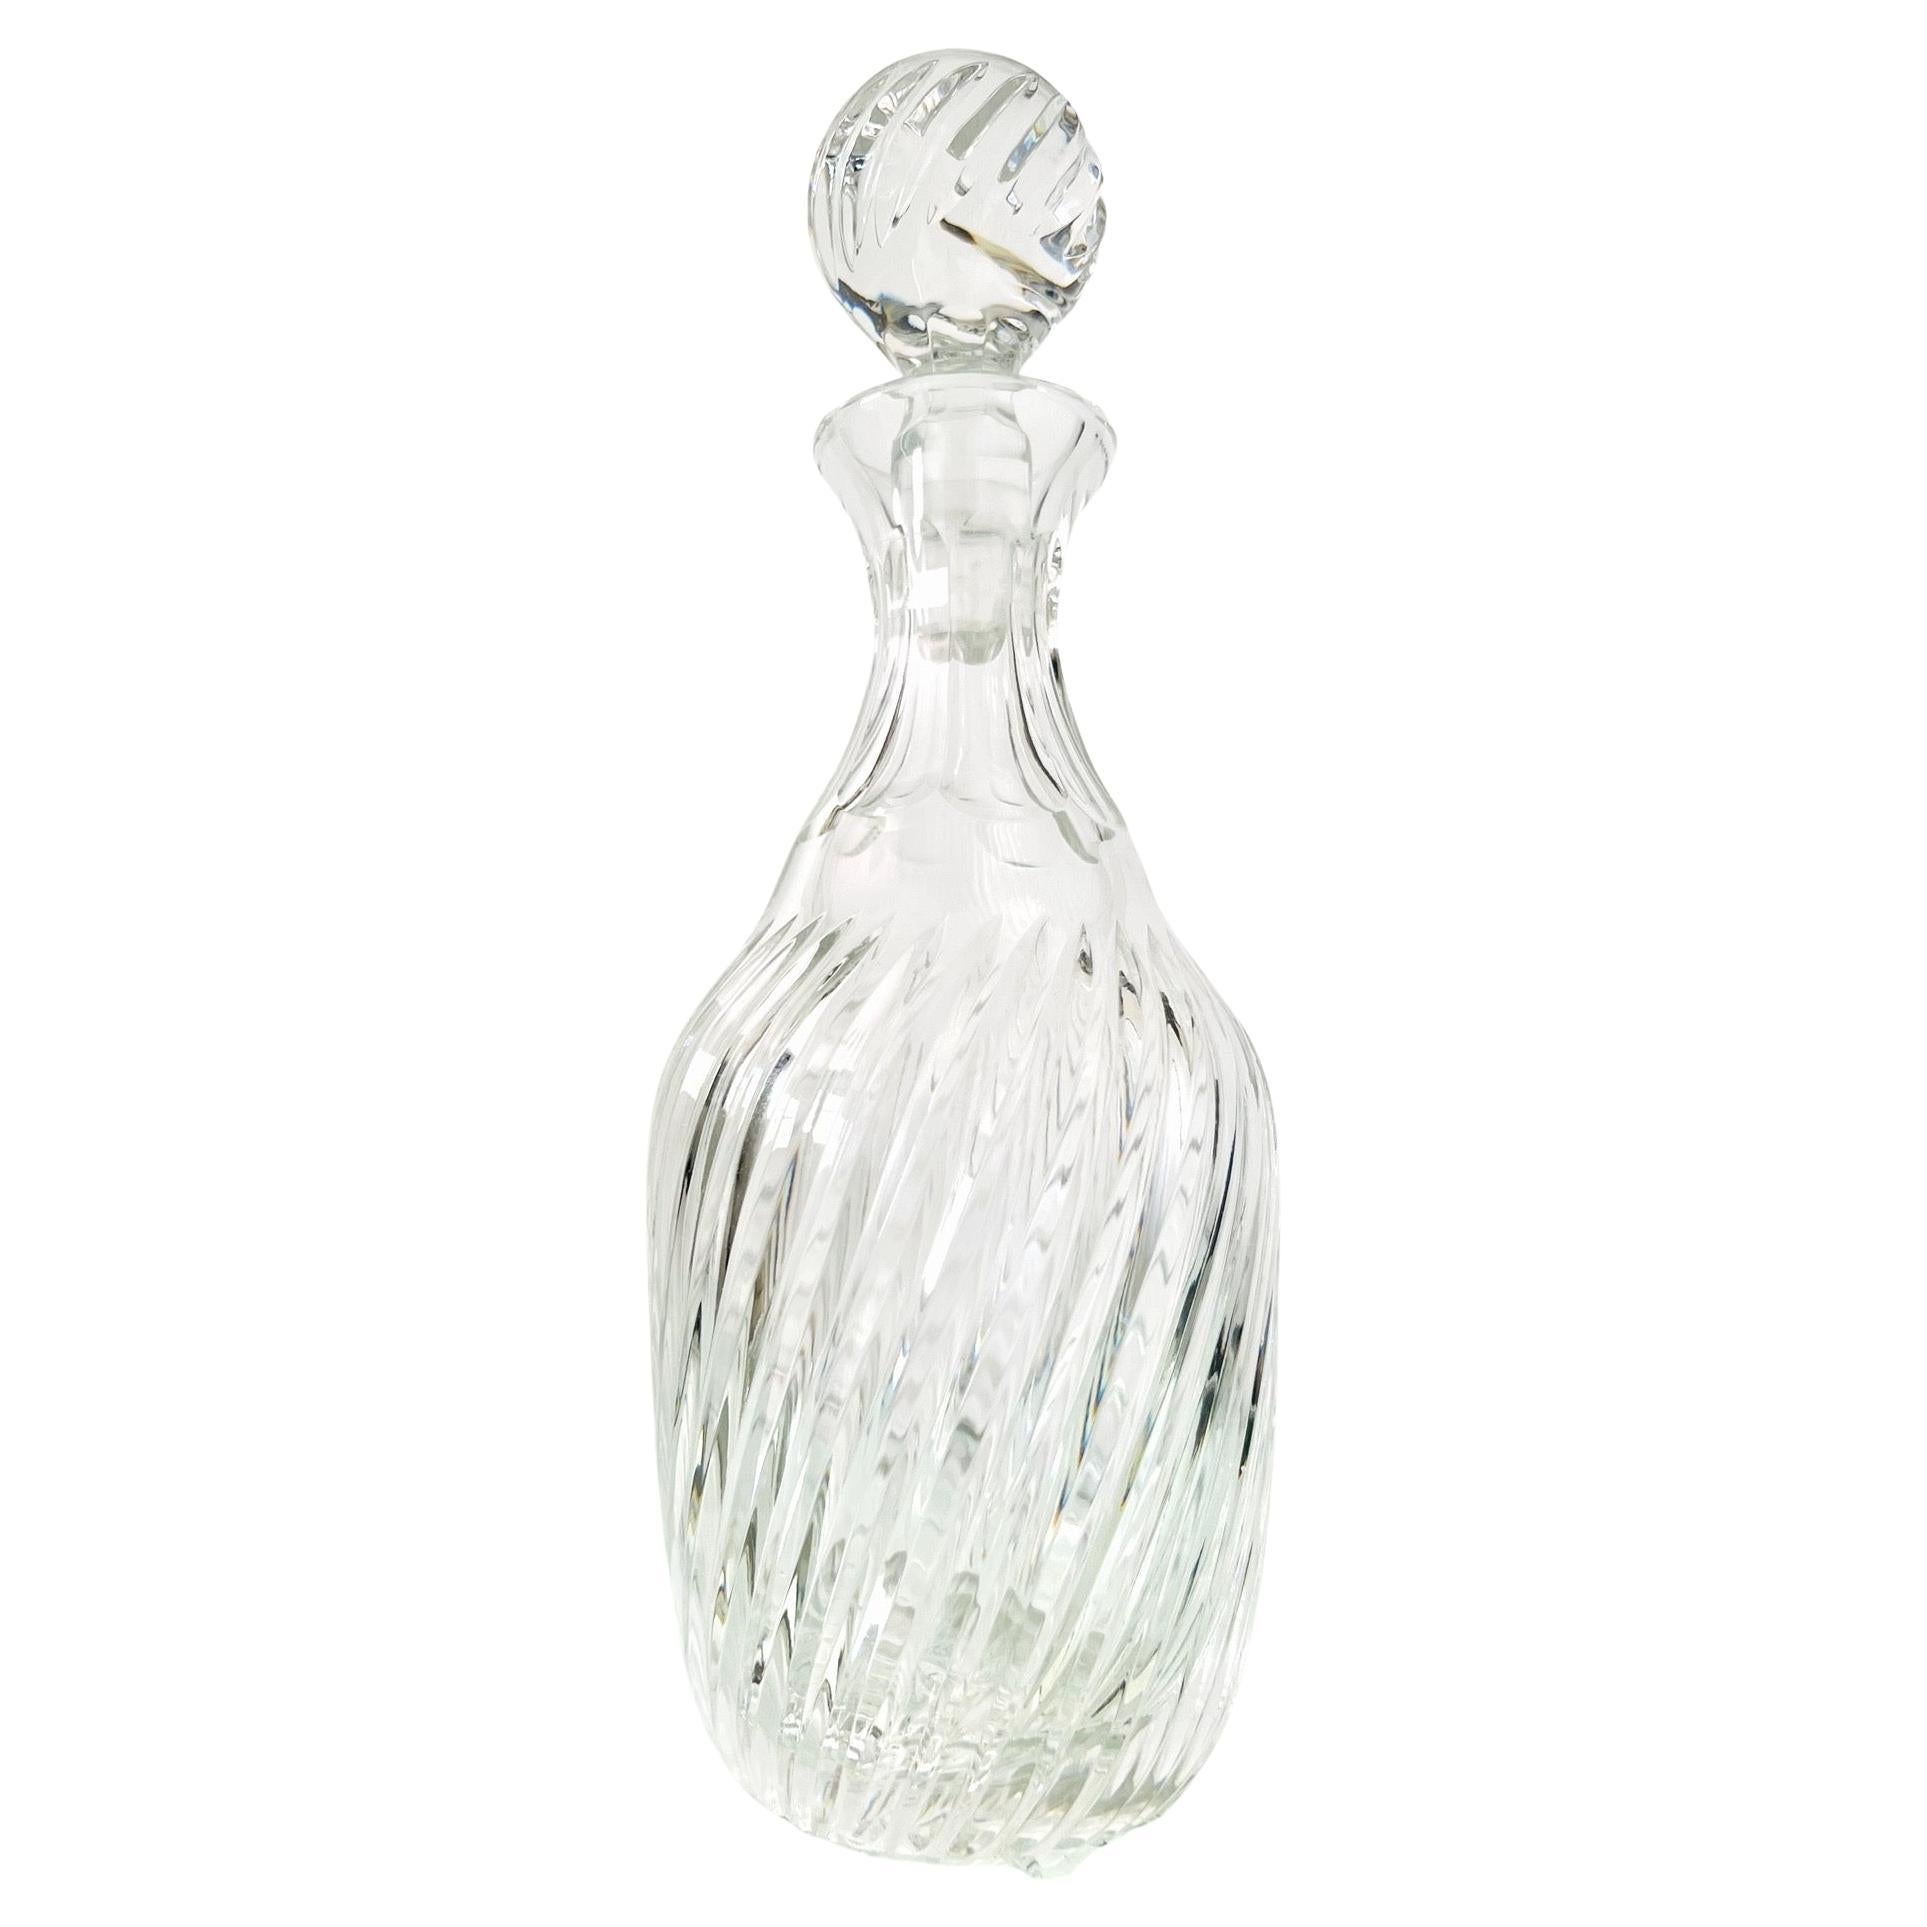 Vintage French Crystal Decanter with Hand-Cut Swirl Designs, c. 1970's